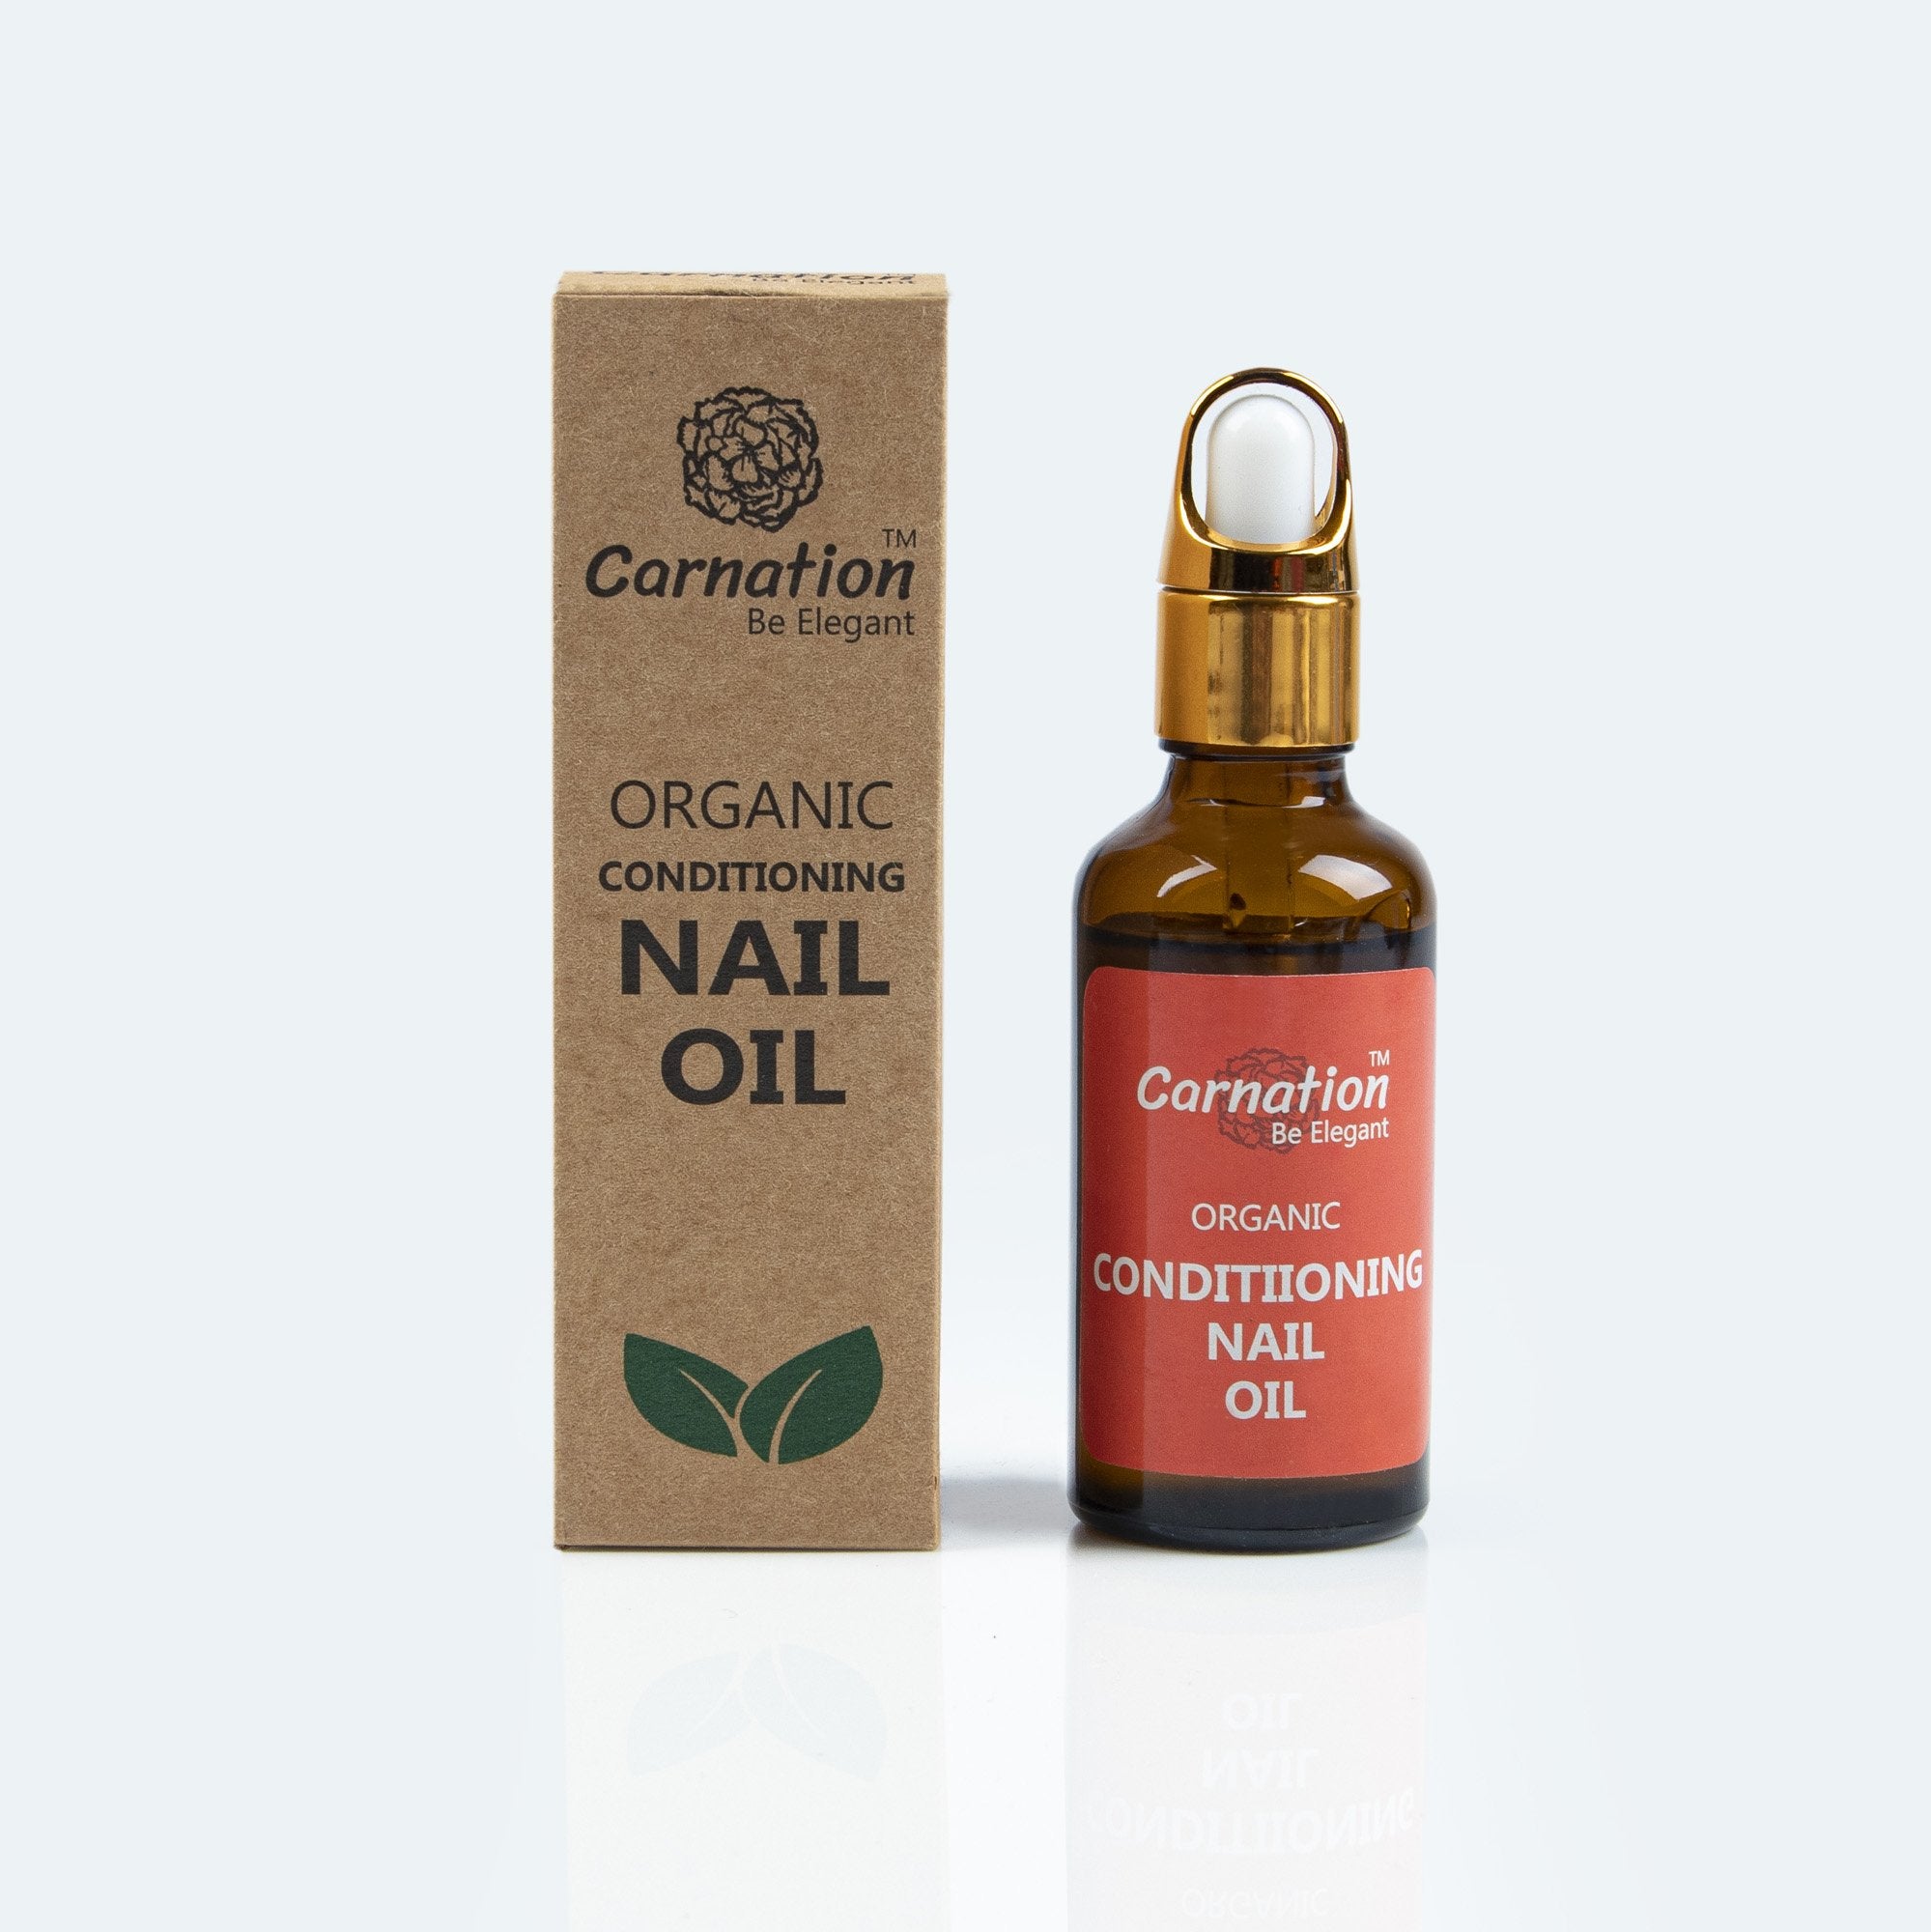 NAIL CARE - COMPLETE SOLUTION DEAL